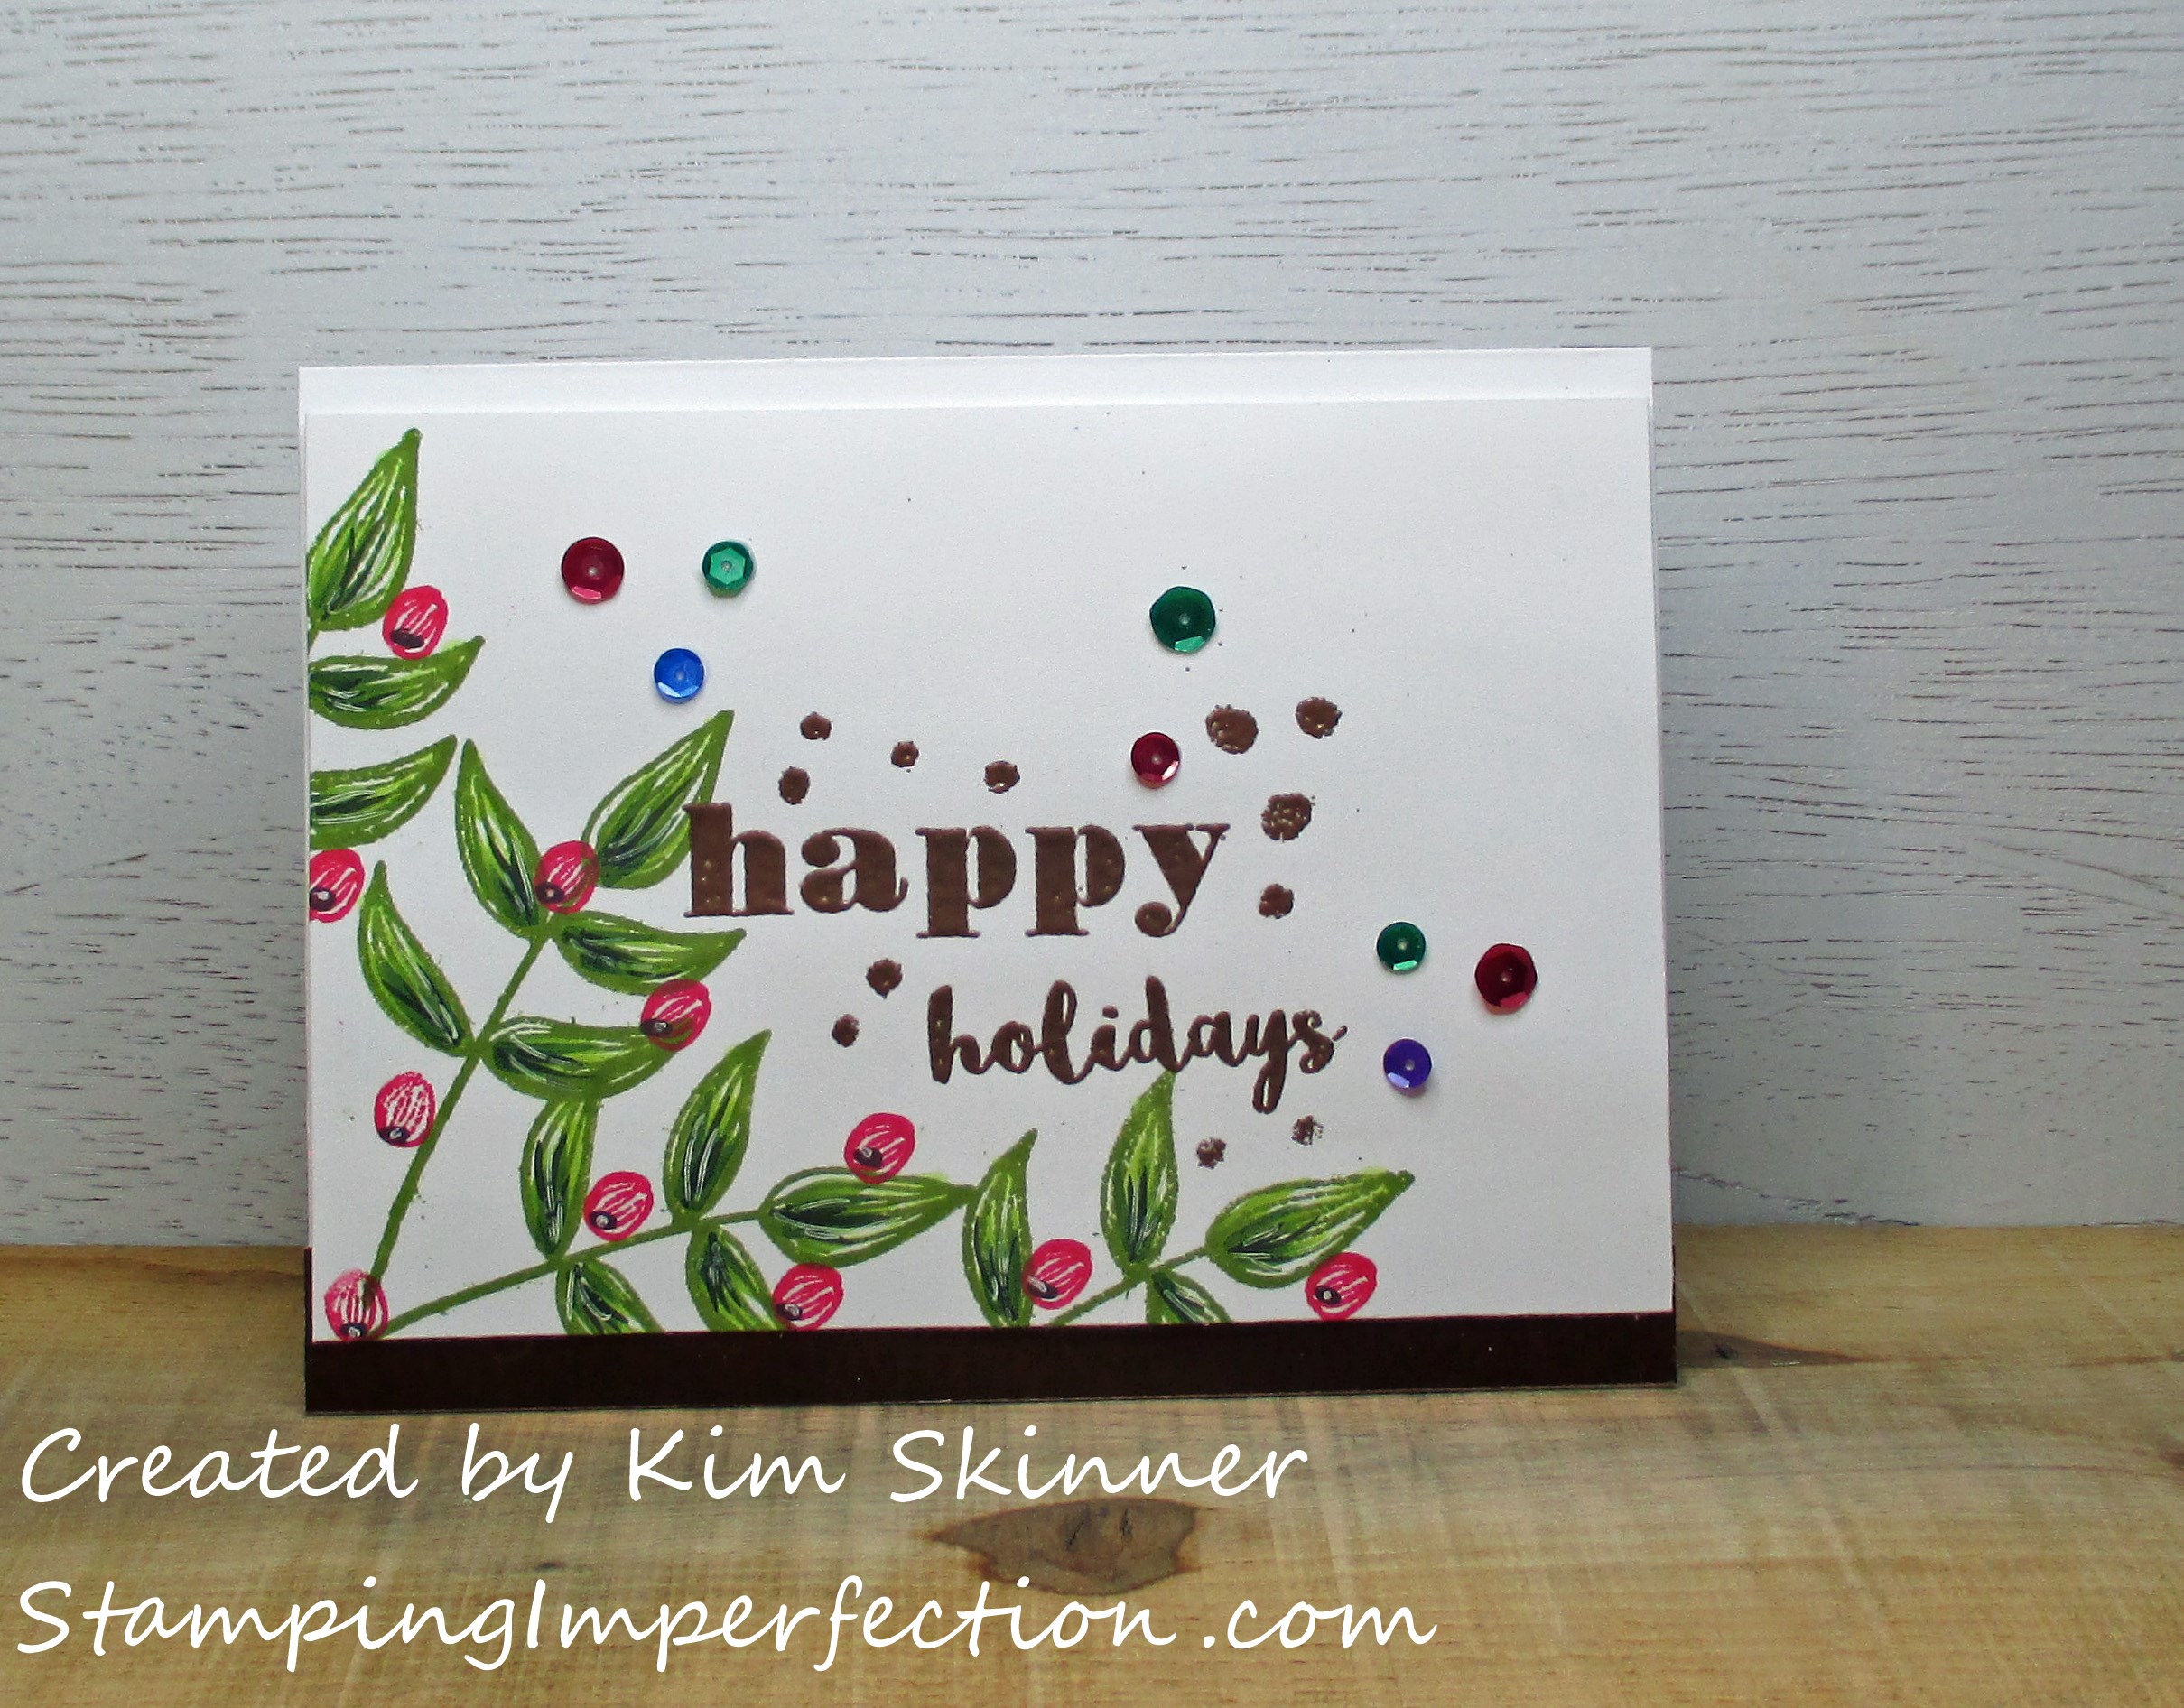 Stamping Imperfection Last Minute Holiday Cards